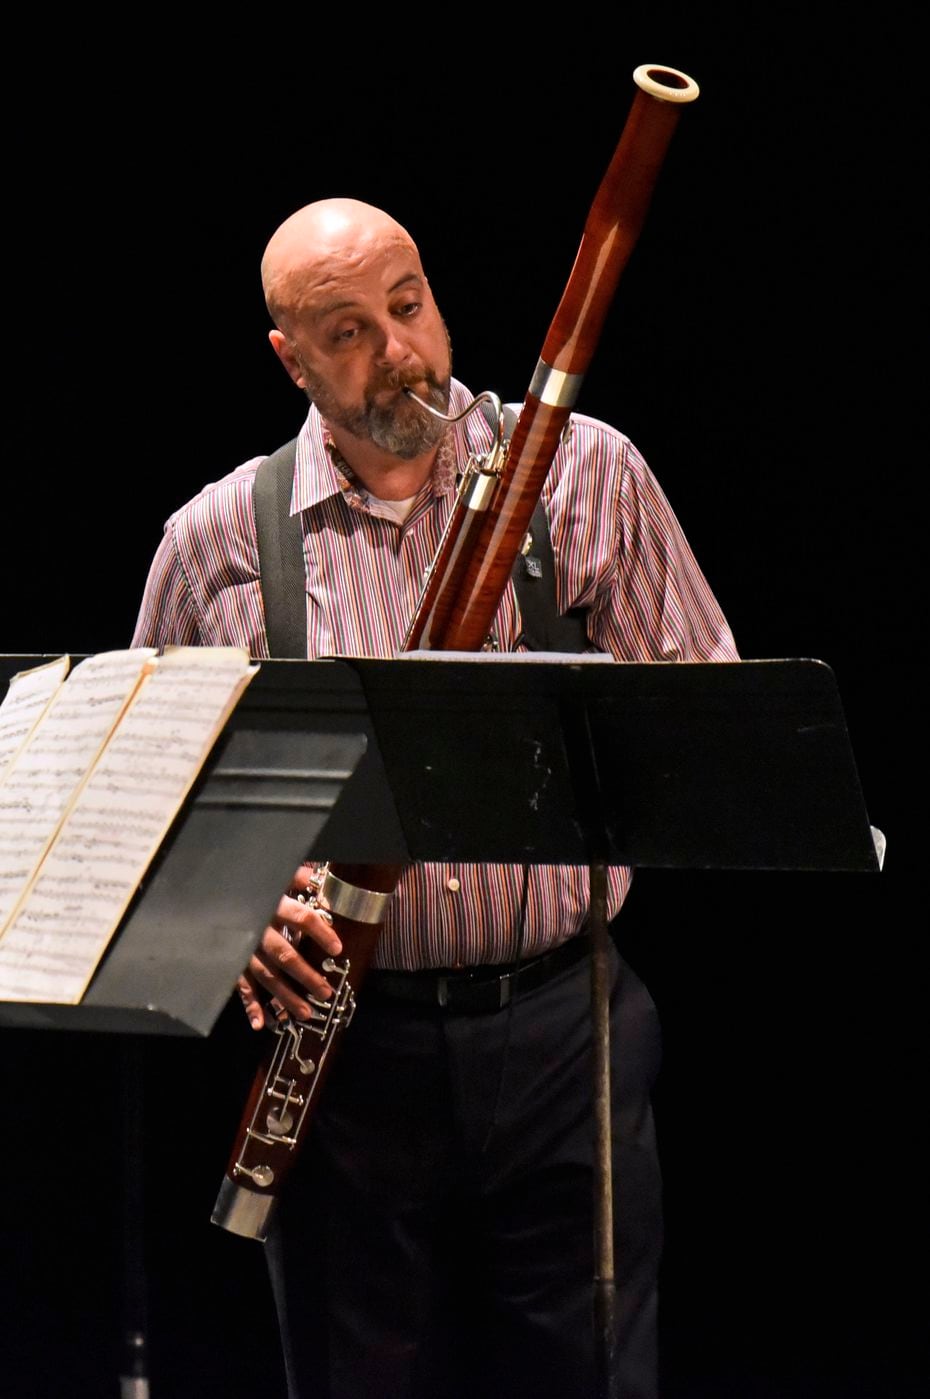 Bassoon soloist Ted Soluri plays a strongly lyrical part in “Ghost of the White Deer.”